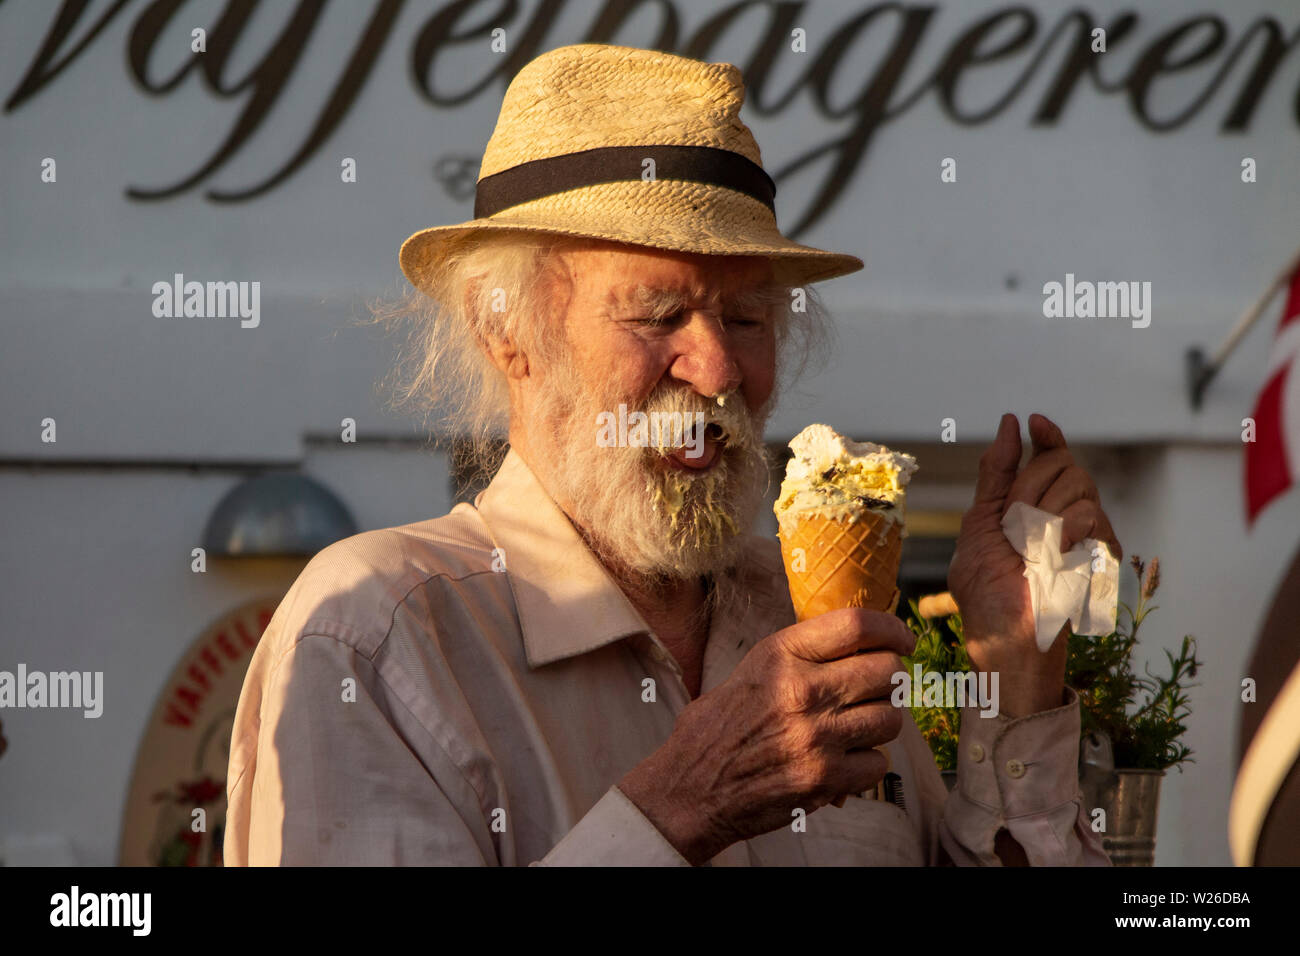 An older man enjoys an ice cream, getting ice cream in his beard and on the end of his nose Stock Photo